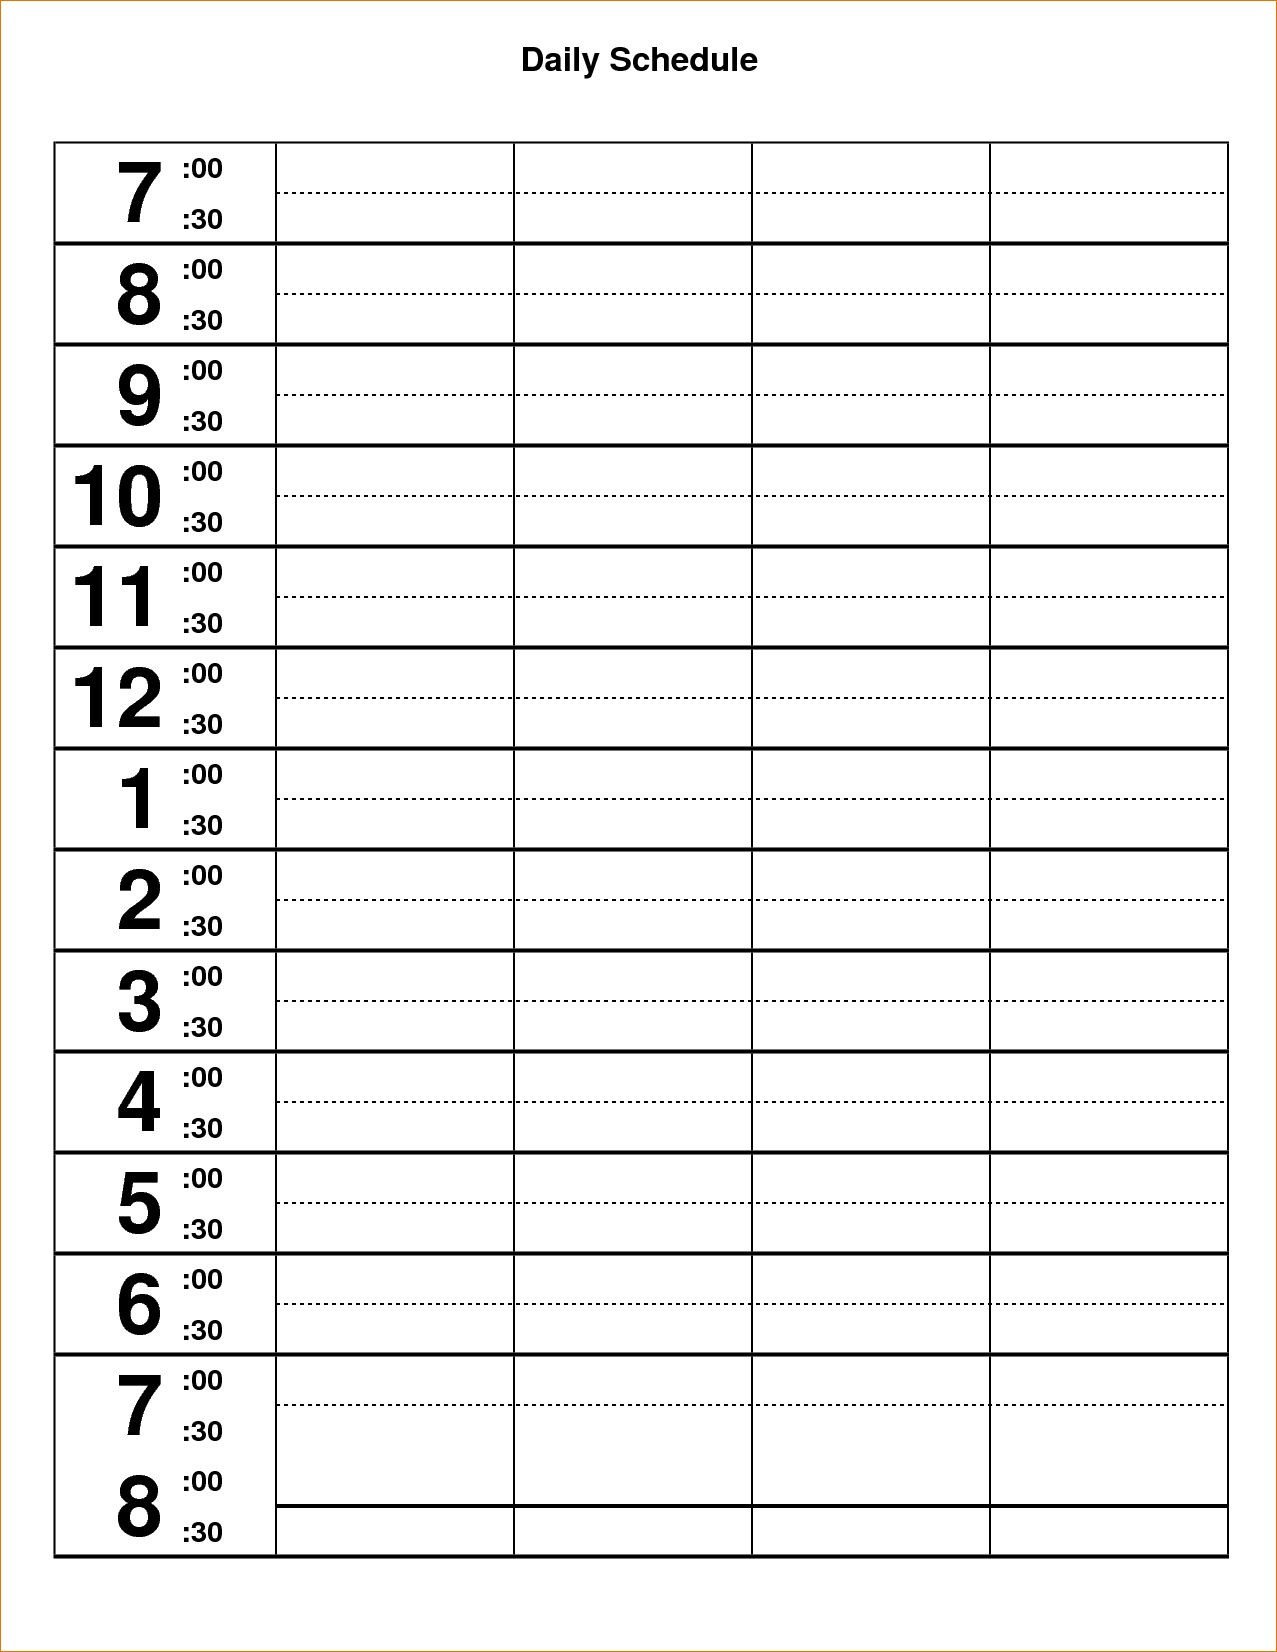 Hourly Chart Template 4 Daily Hourly Schedule Ganttchart Template Inside Hourly